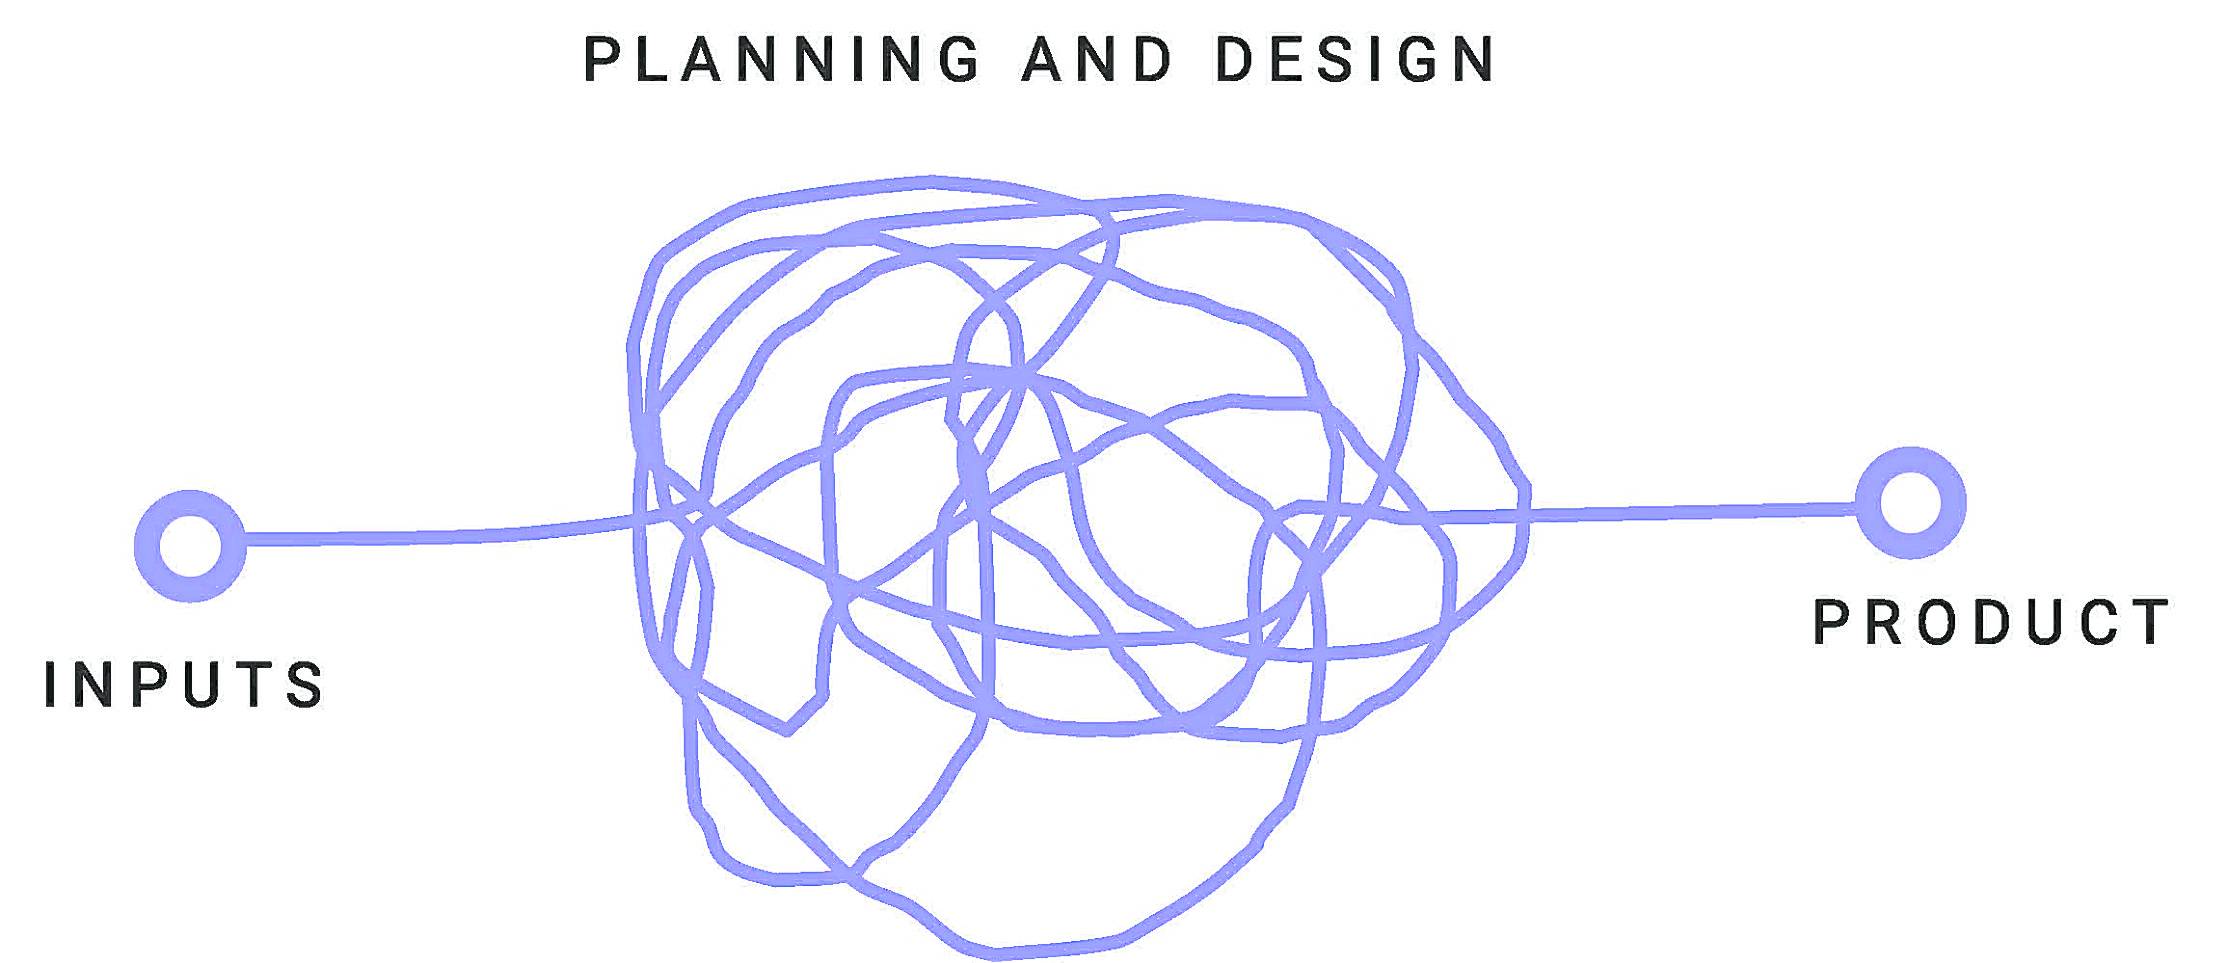 The process of design, just like the process of development, can be messy.